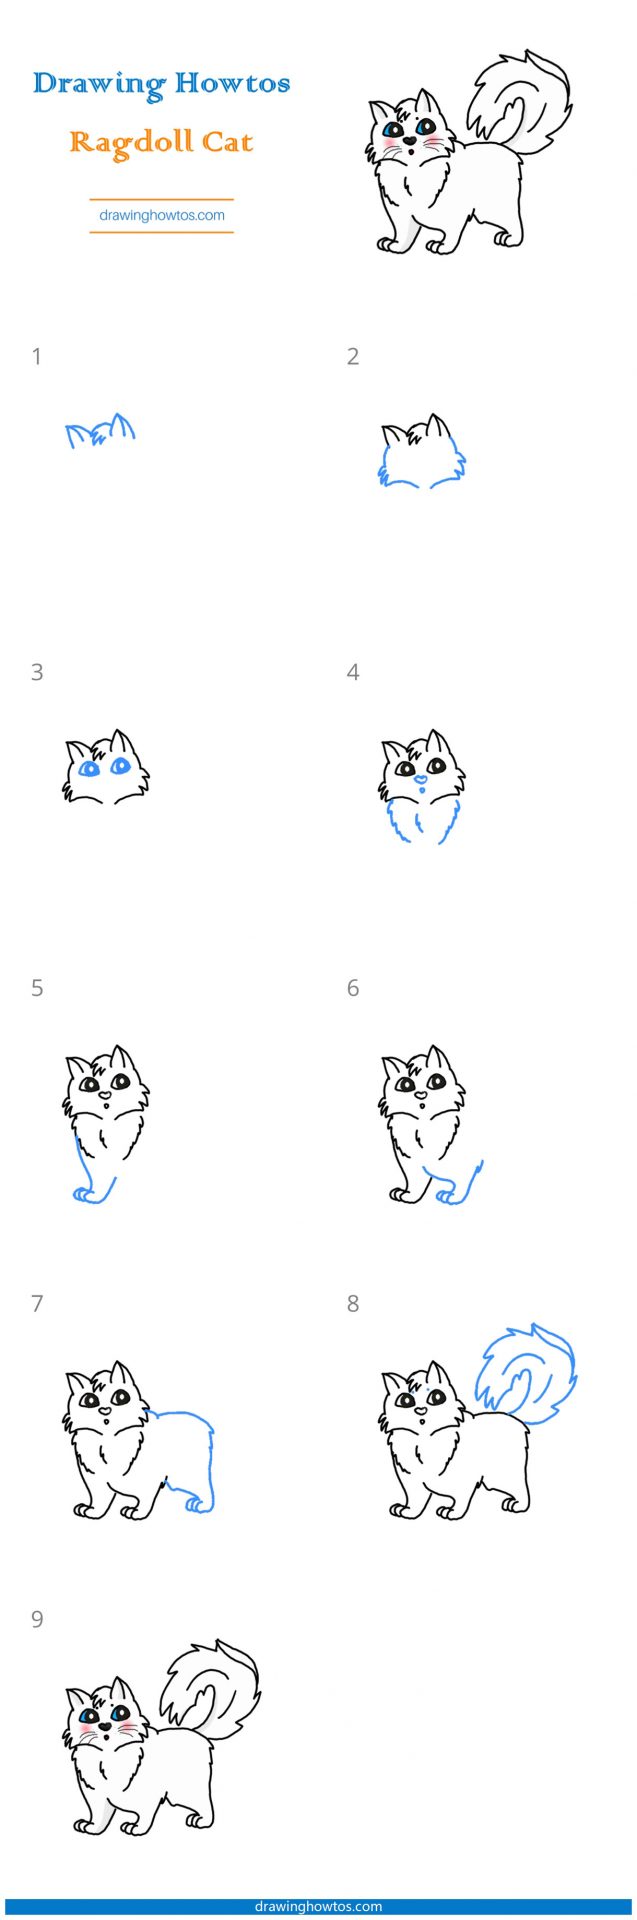 How to Draw a Ragdoll Cat Step by Step